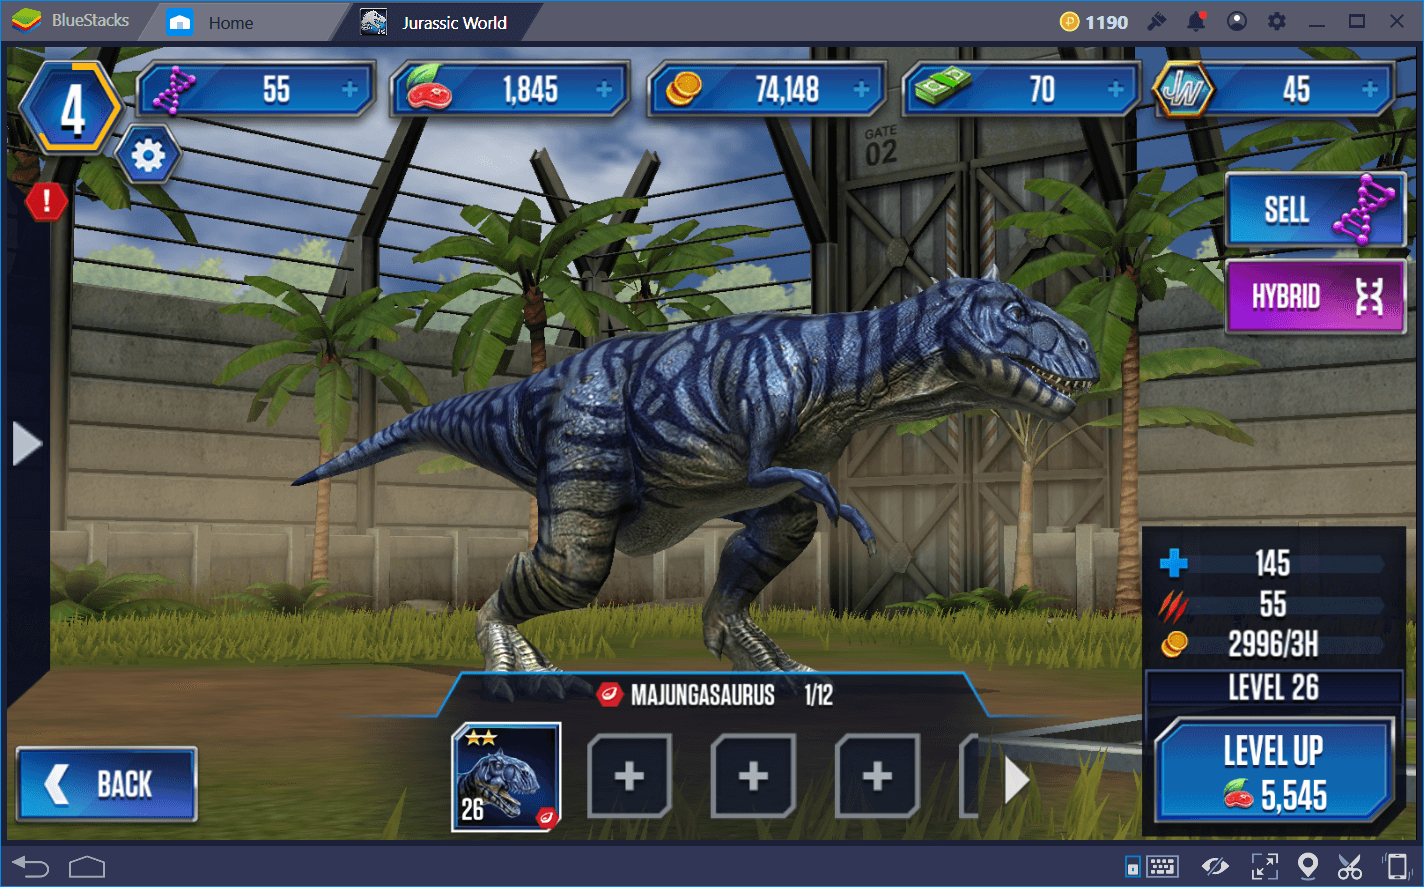 Battle and Duel Strategy Guide for Jurassic World: The Game